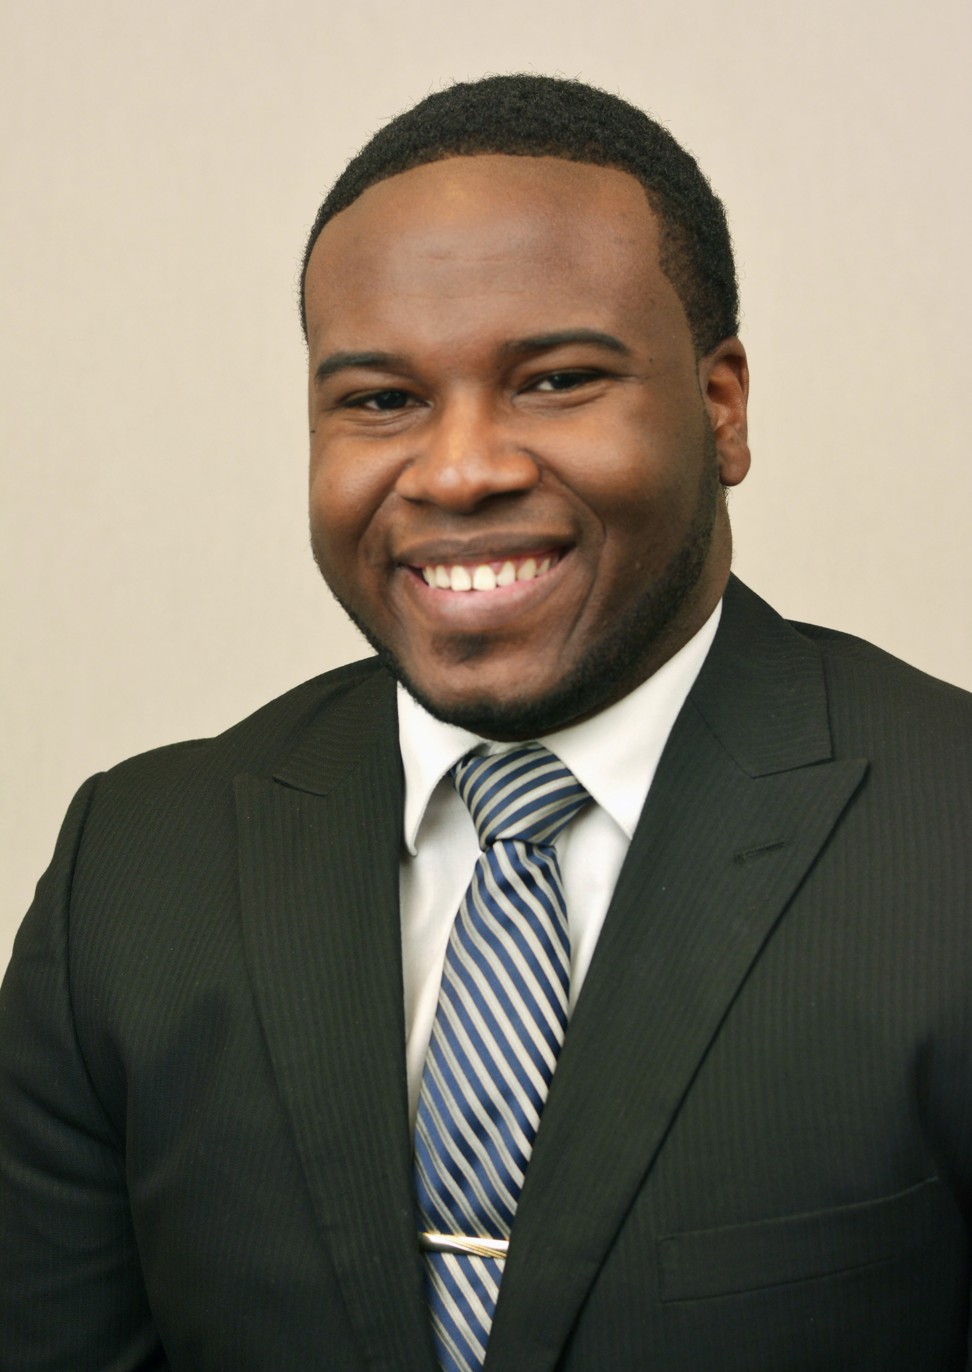 A February 2014 portrait of Botham Jean, who was shot dead in his own apartment. Photo: Harding University via AP